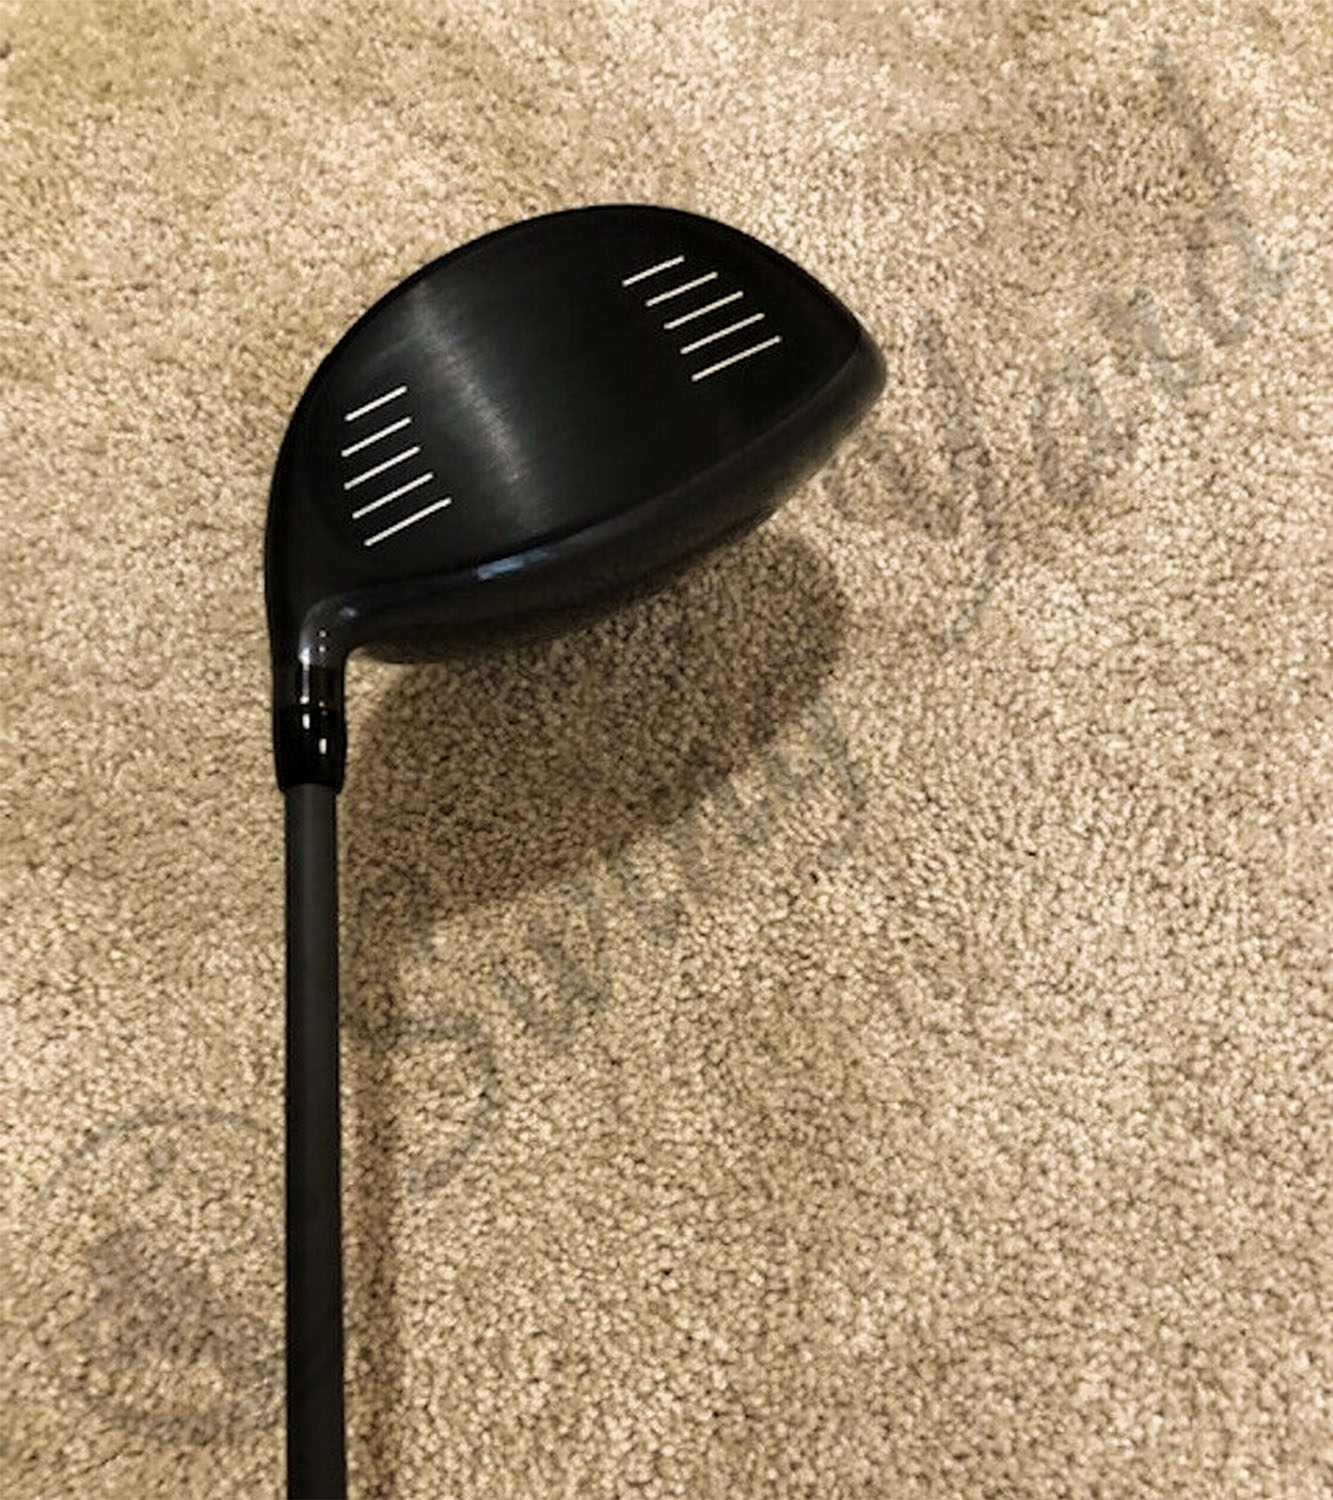 I snapped a photo of the Cobra Air X Offset driver in my living room